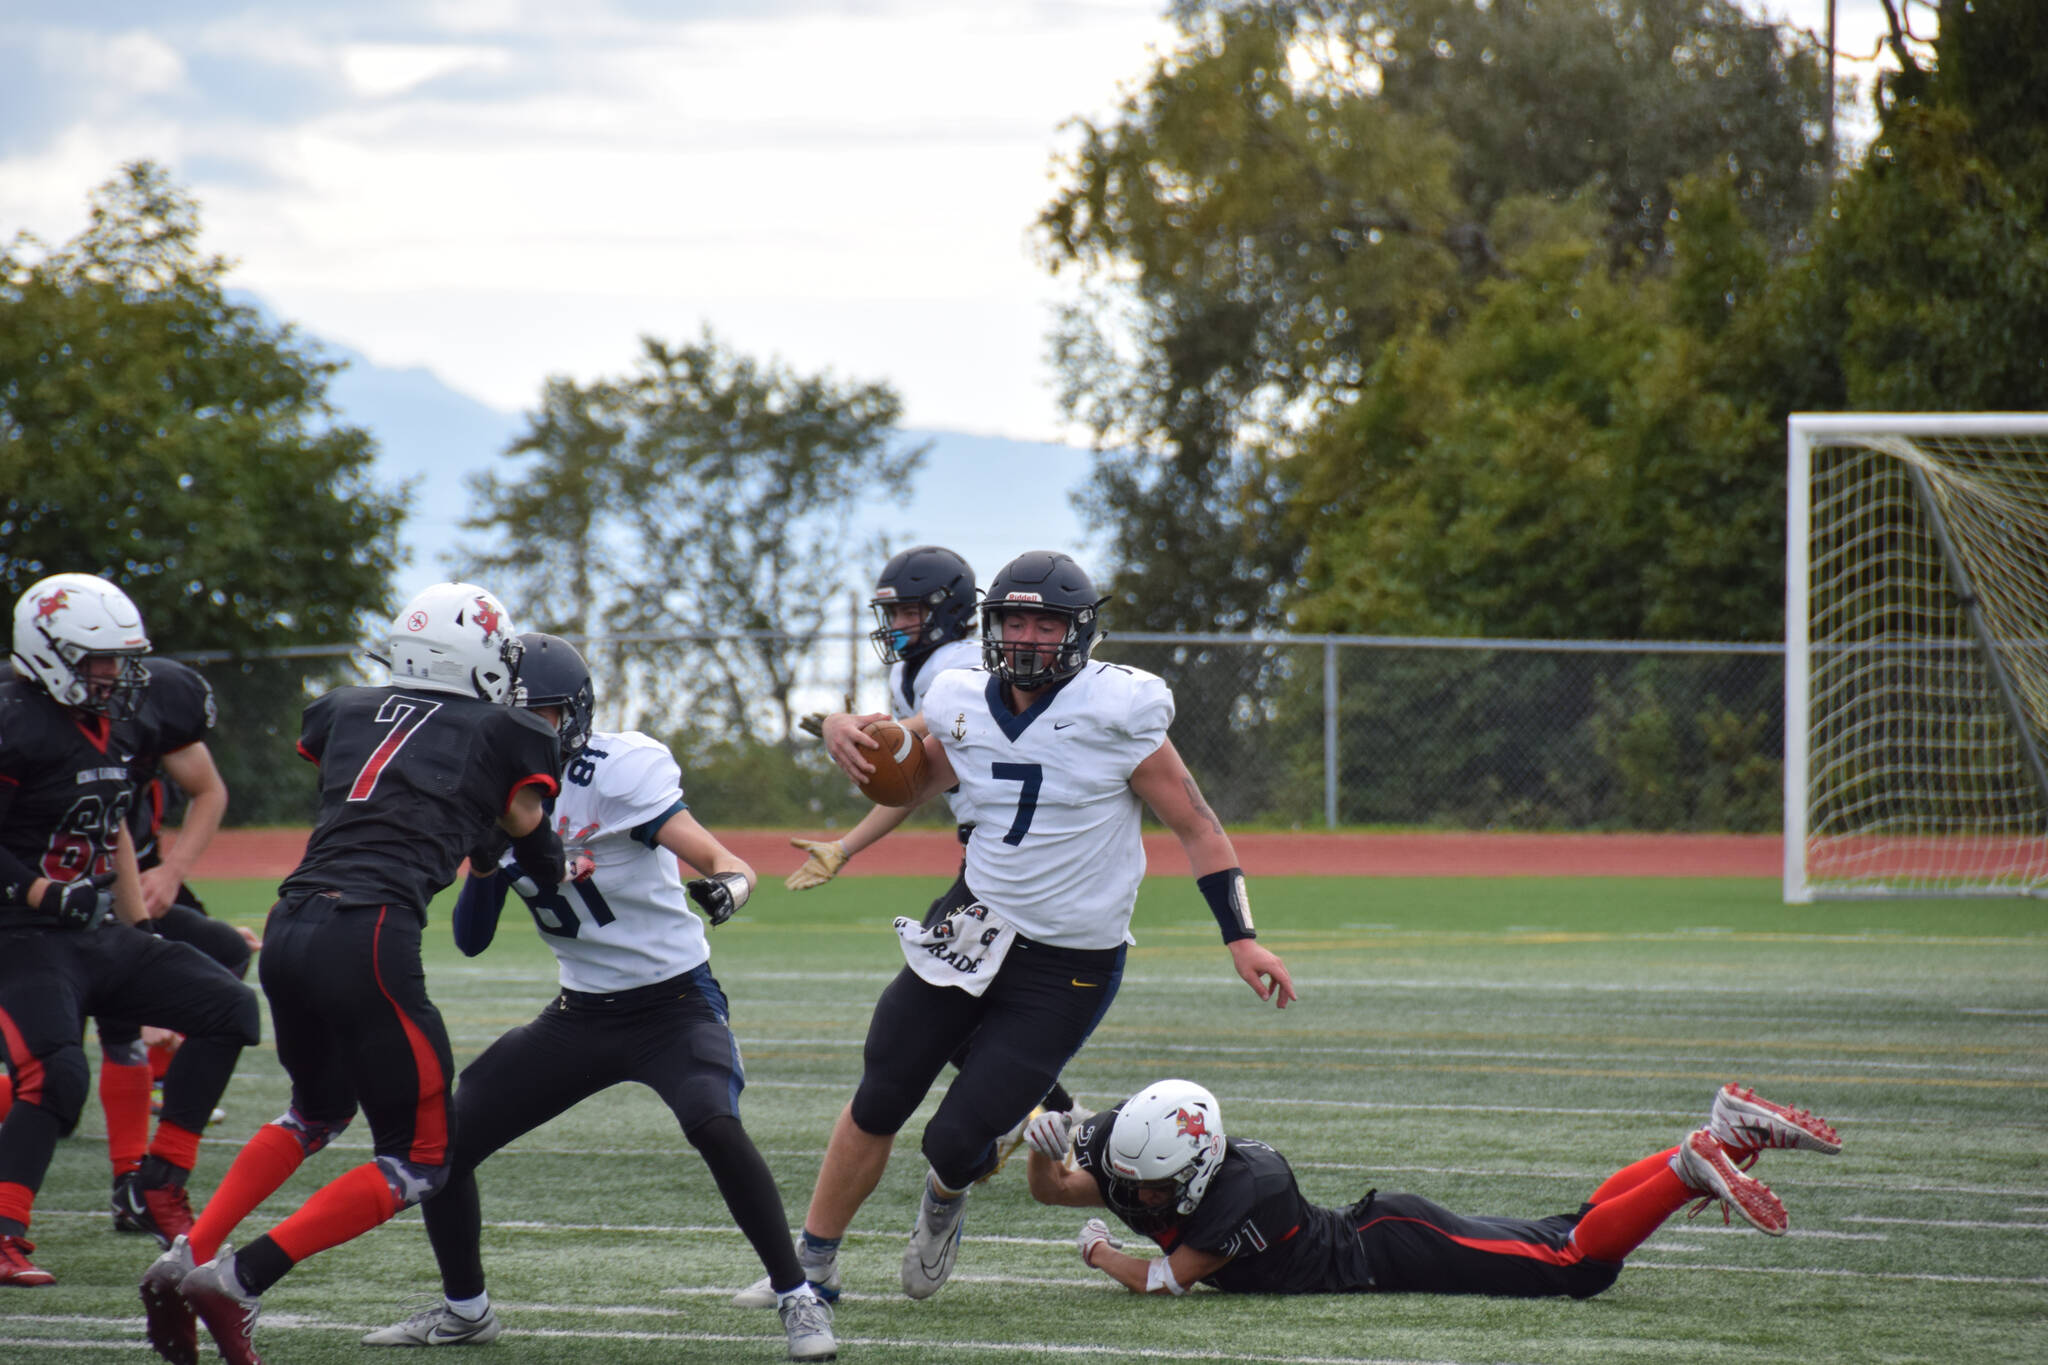 Tennison evades a diving tackle on Saturday, Sep. 3, at the Homer High School Field in Homer, Alaska. (Photo by Charlie Menke/ Homer News)